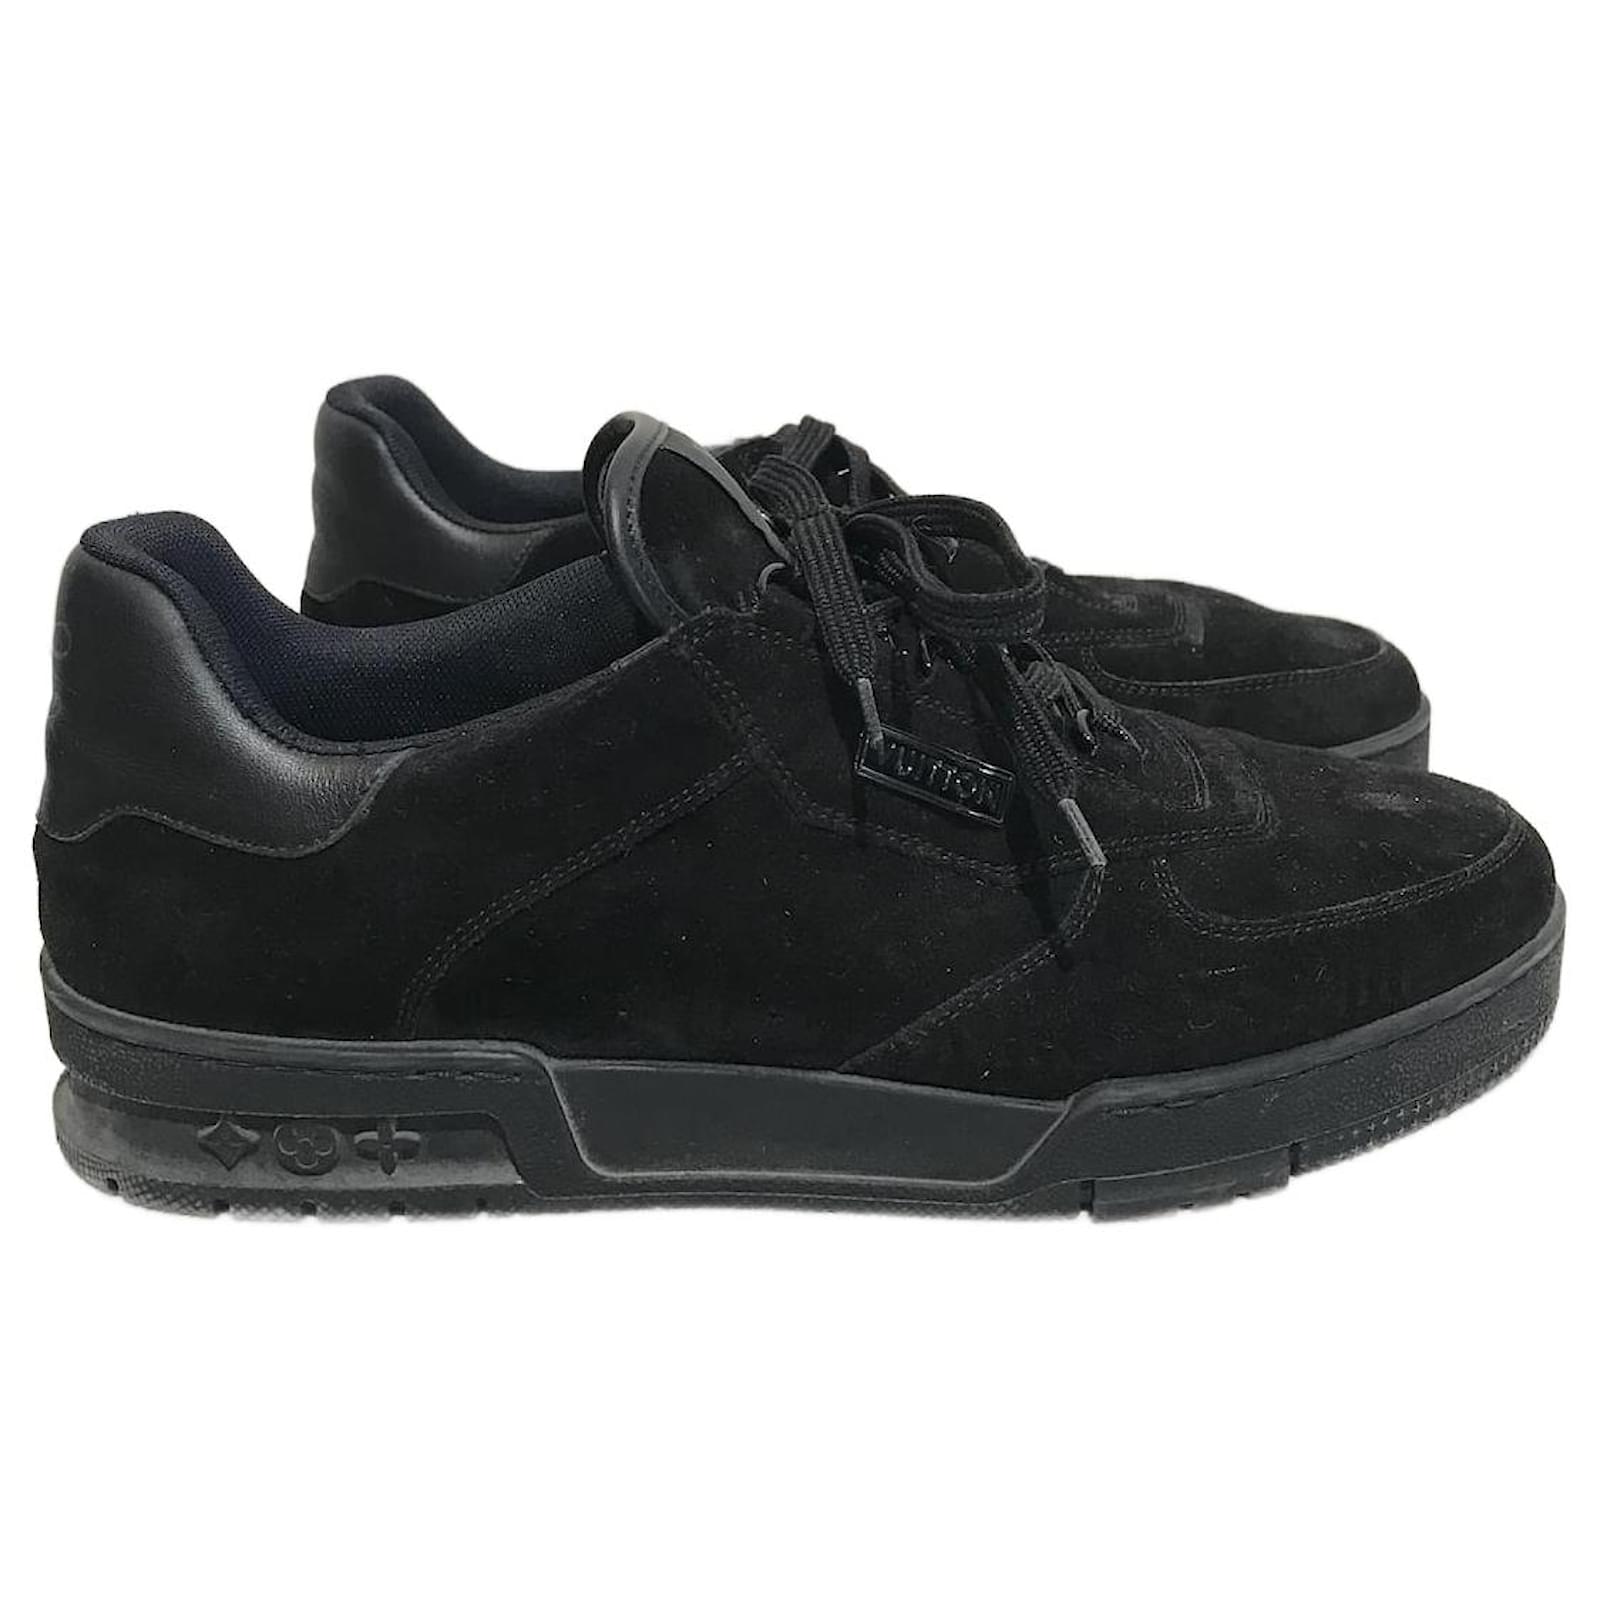 Lv trainer low trainers Louis Vuitton Black size 6 US in Suede